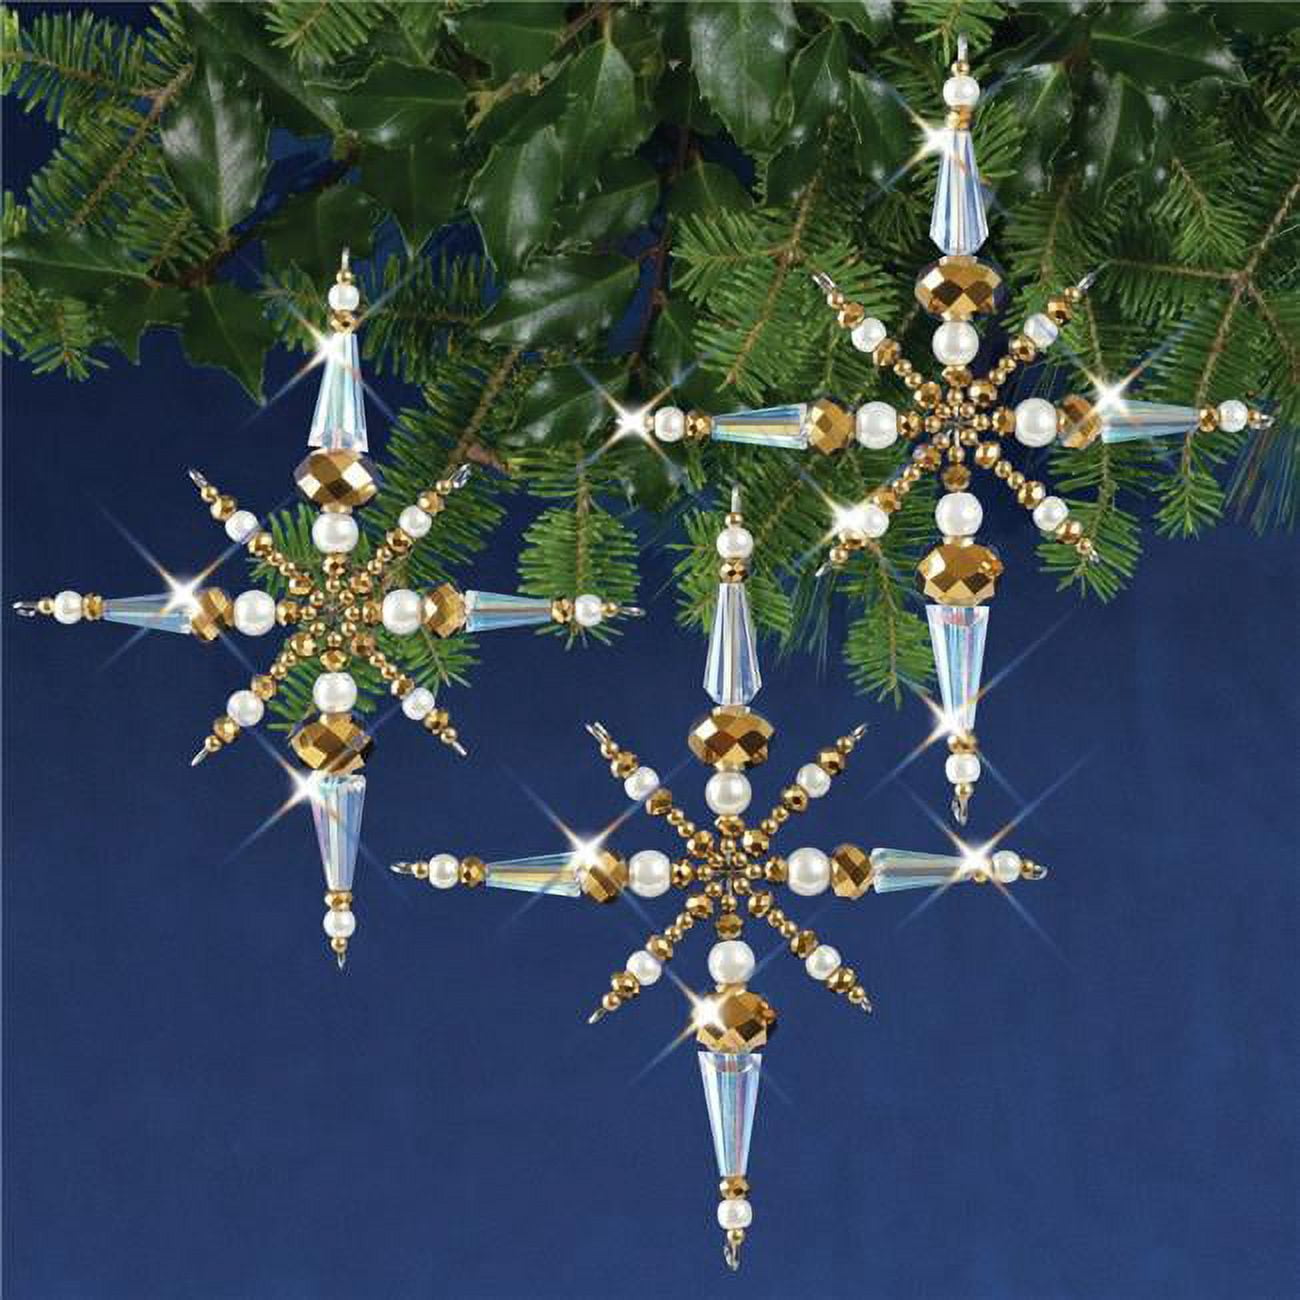 Solid Oak Holiday Beaded Ornament Kit-Golden Angels Makes 3